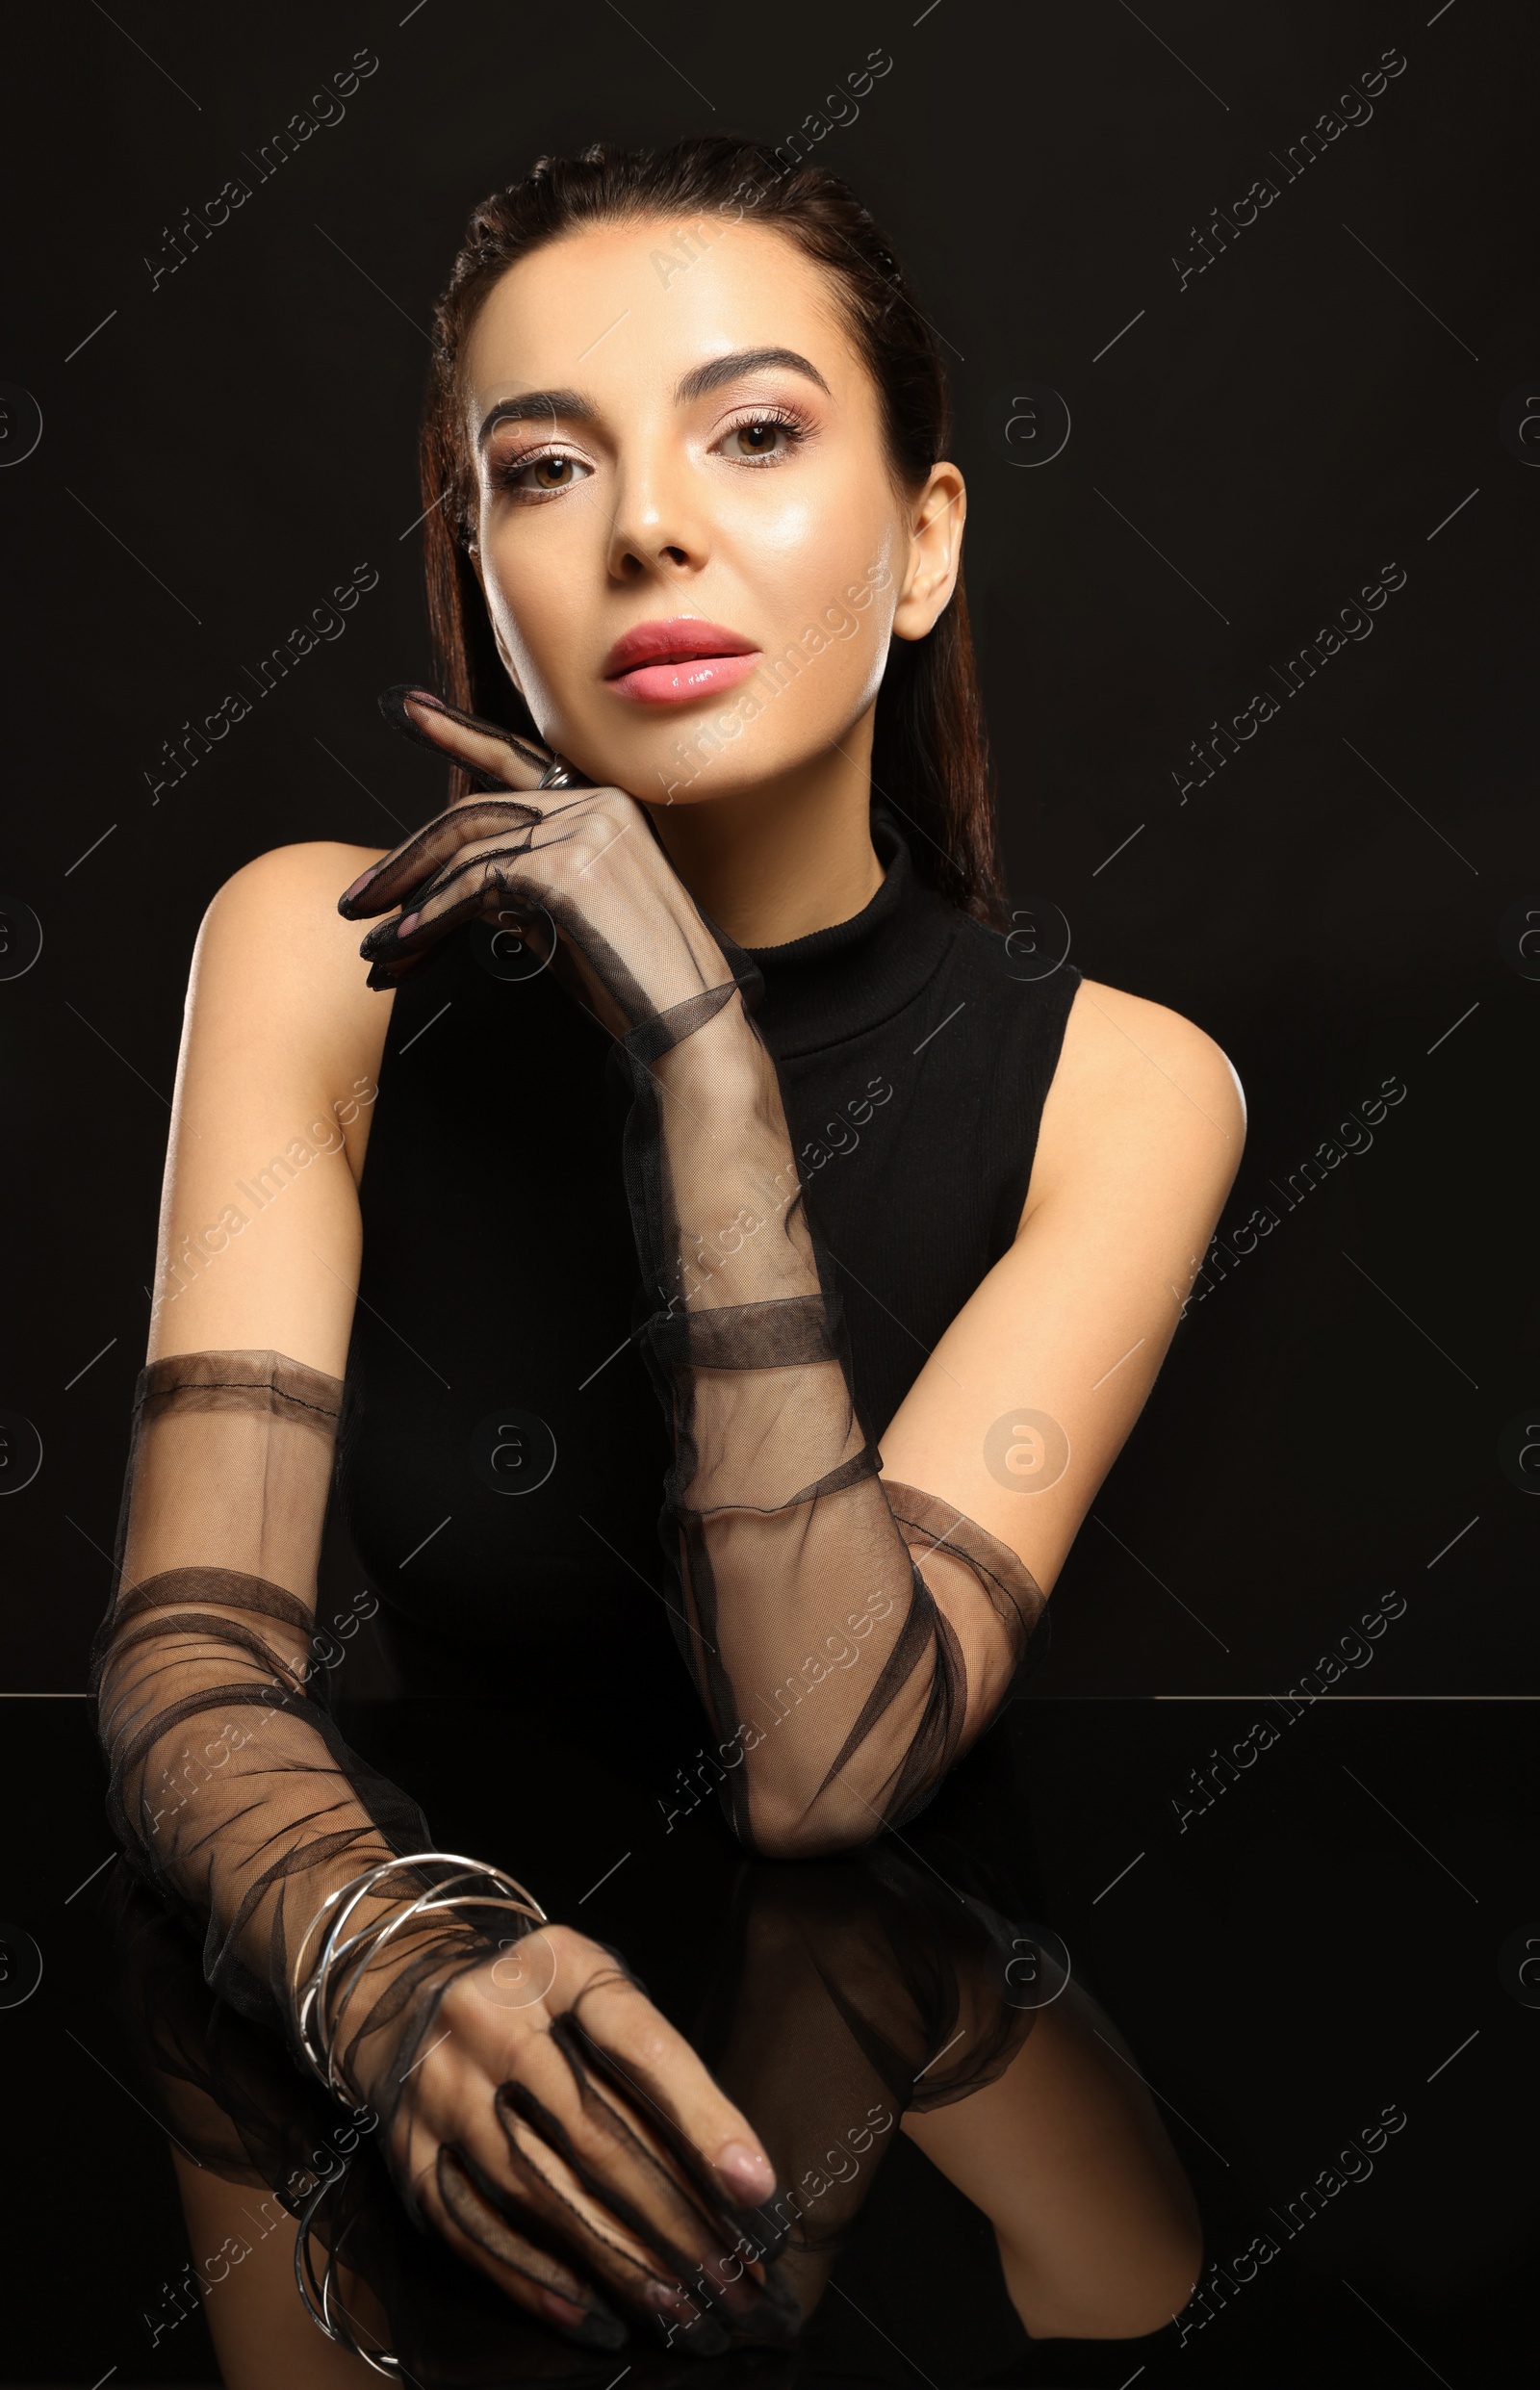 Photo of Beautiful young woman in evening gloves at black glass table against dark background